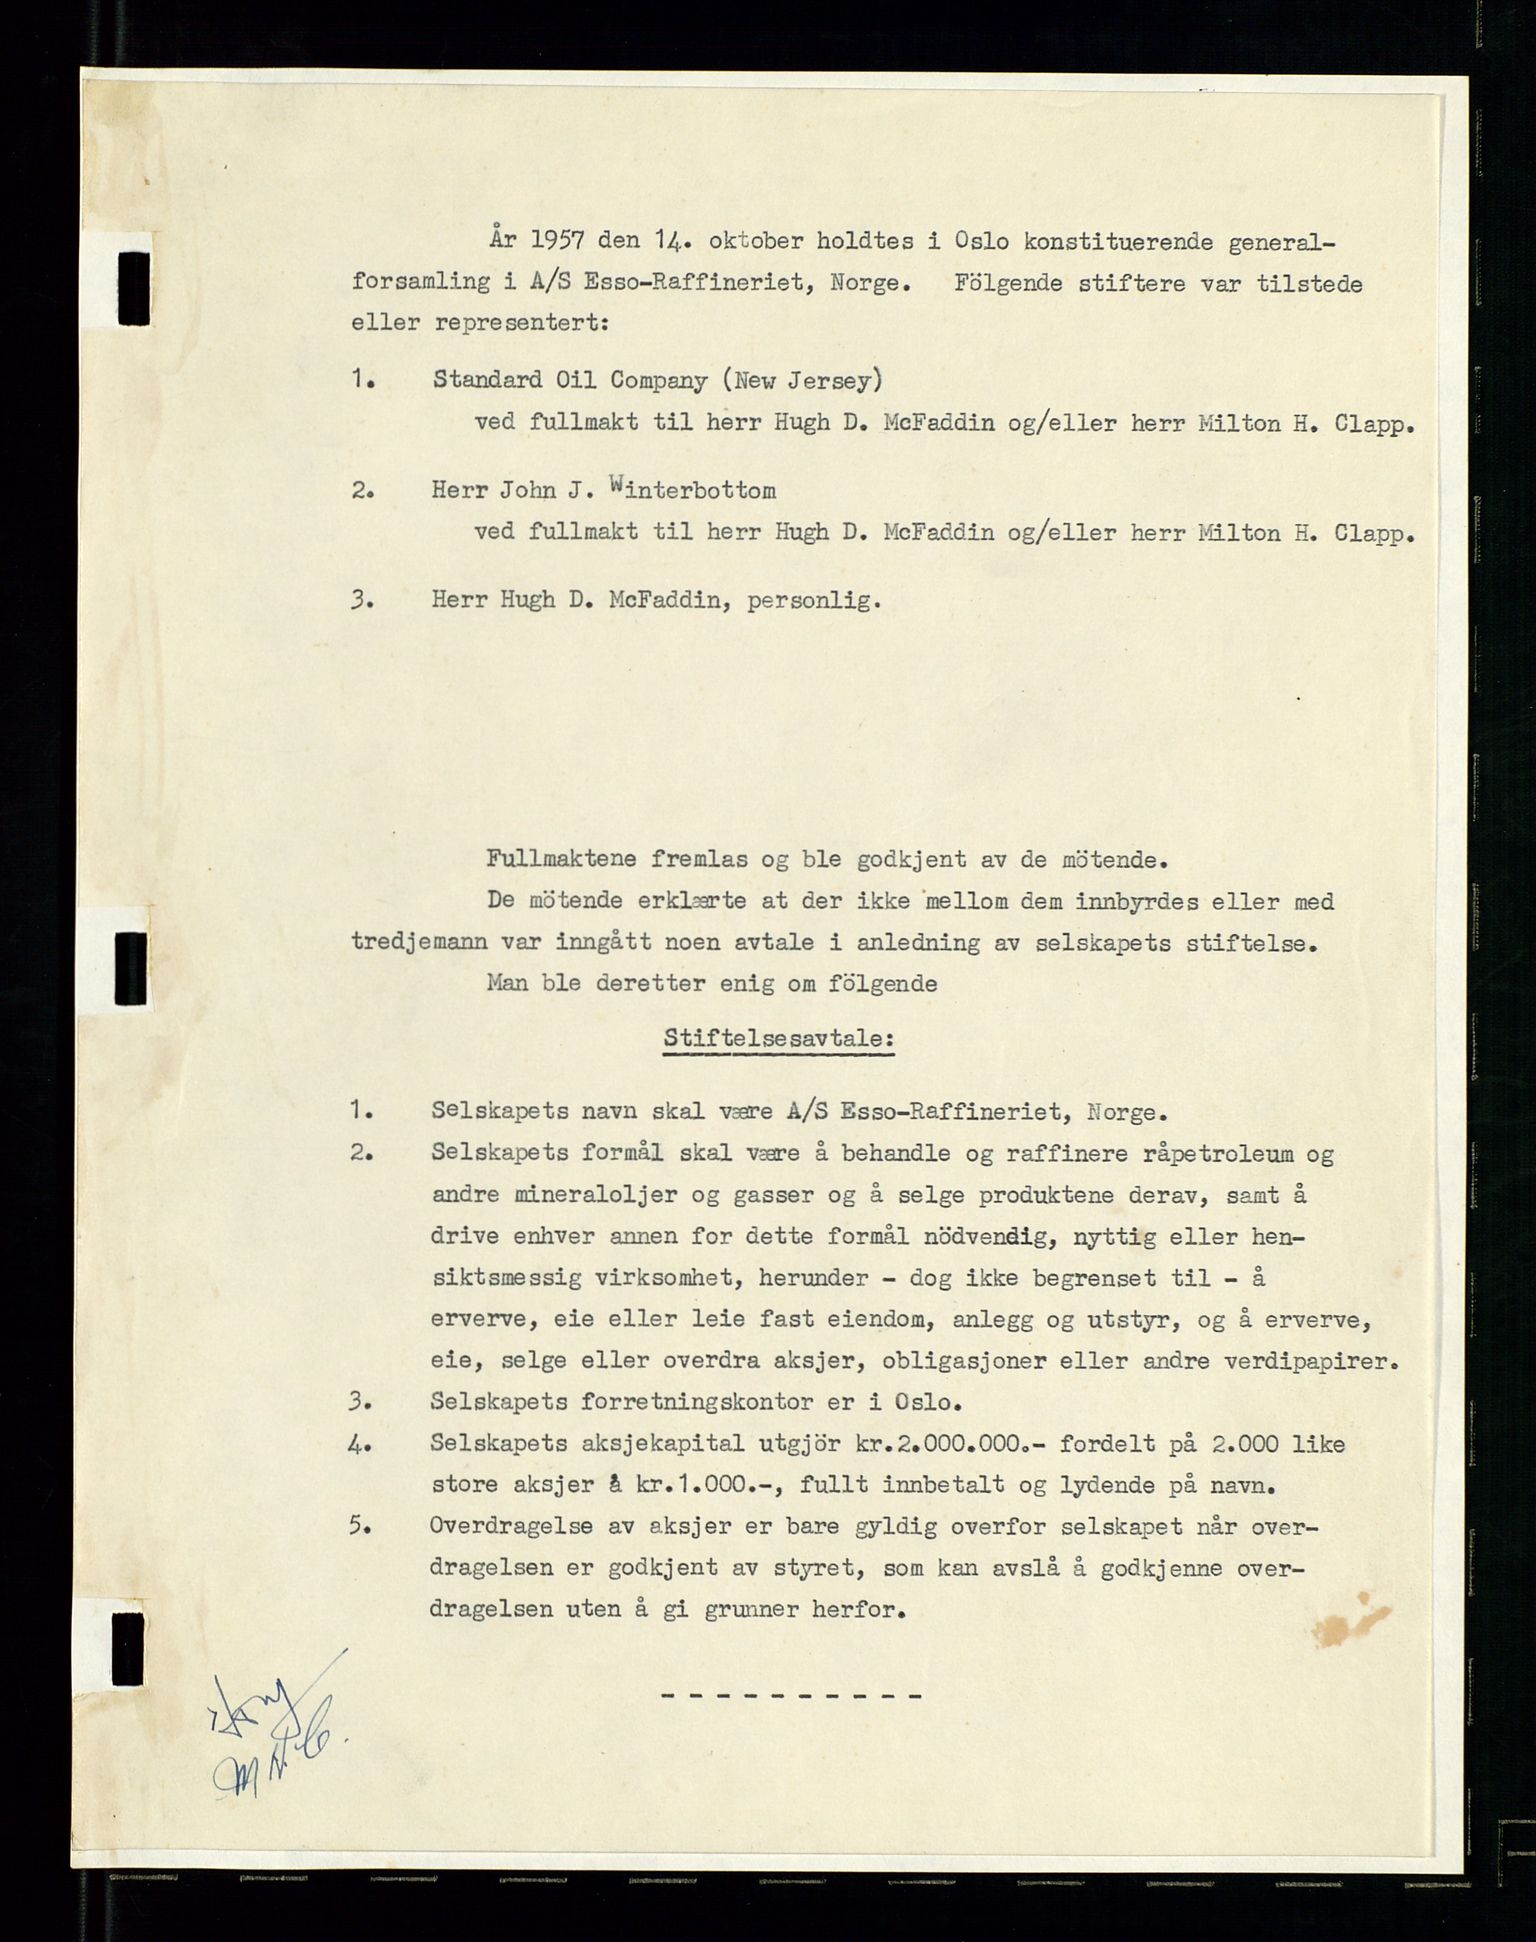 PA 1537 - A/S Essoraffineriet Norge, SAST/A-101957/A/Aa/L0001/0002: Styremøter / Shareholder meetings, board meetings, by laws (vedtekter), 1957-1960, s. 81